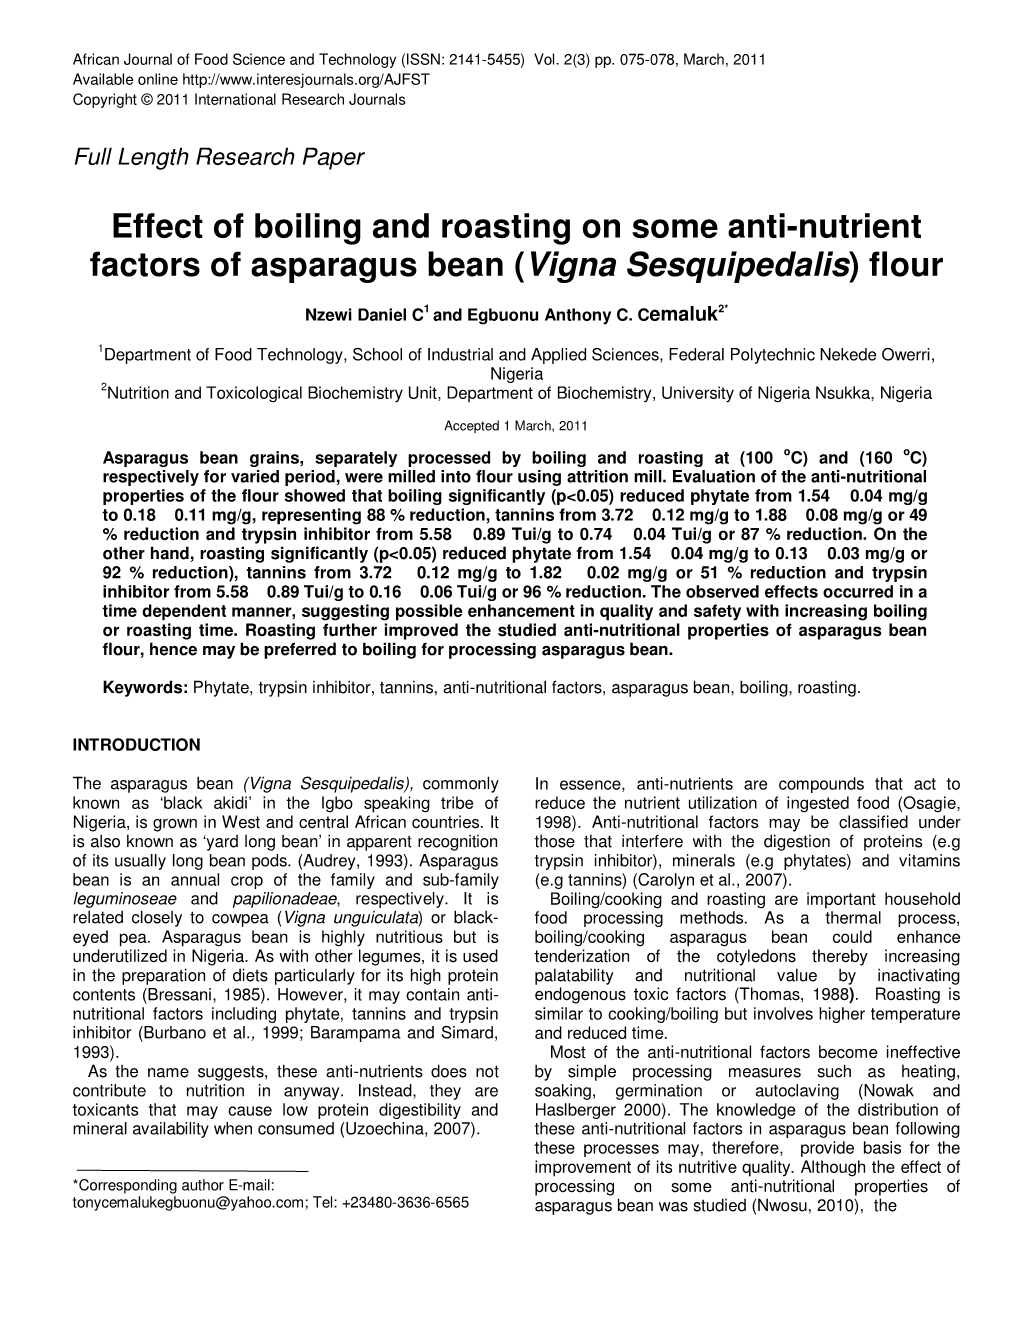 Effect of Boiling and Roasting on Some Anti-Nutrient Factors of Asparagus Bean (Vigna Sesquipedalis) Flour